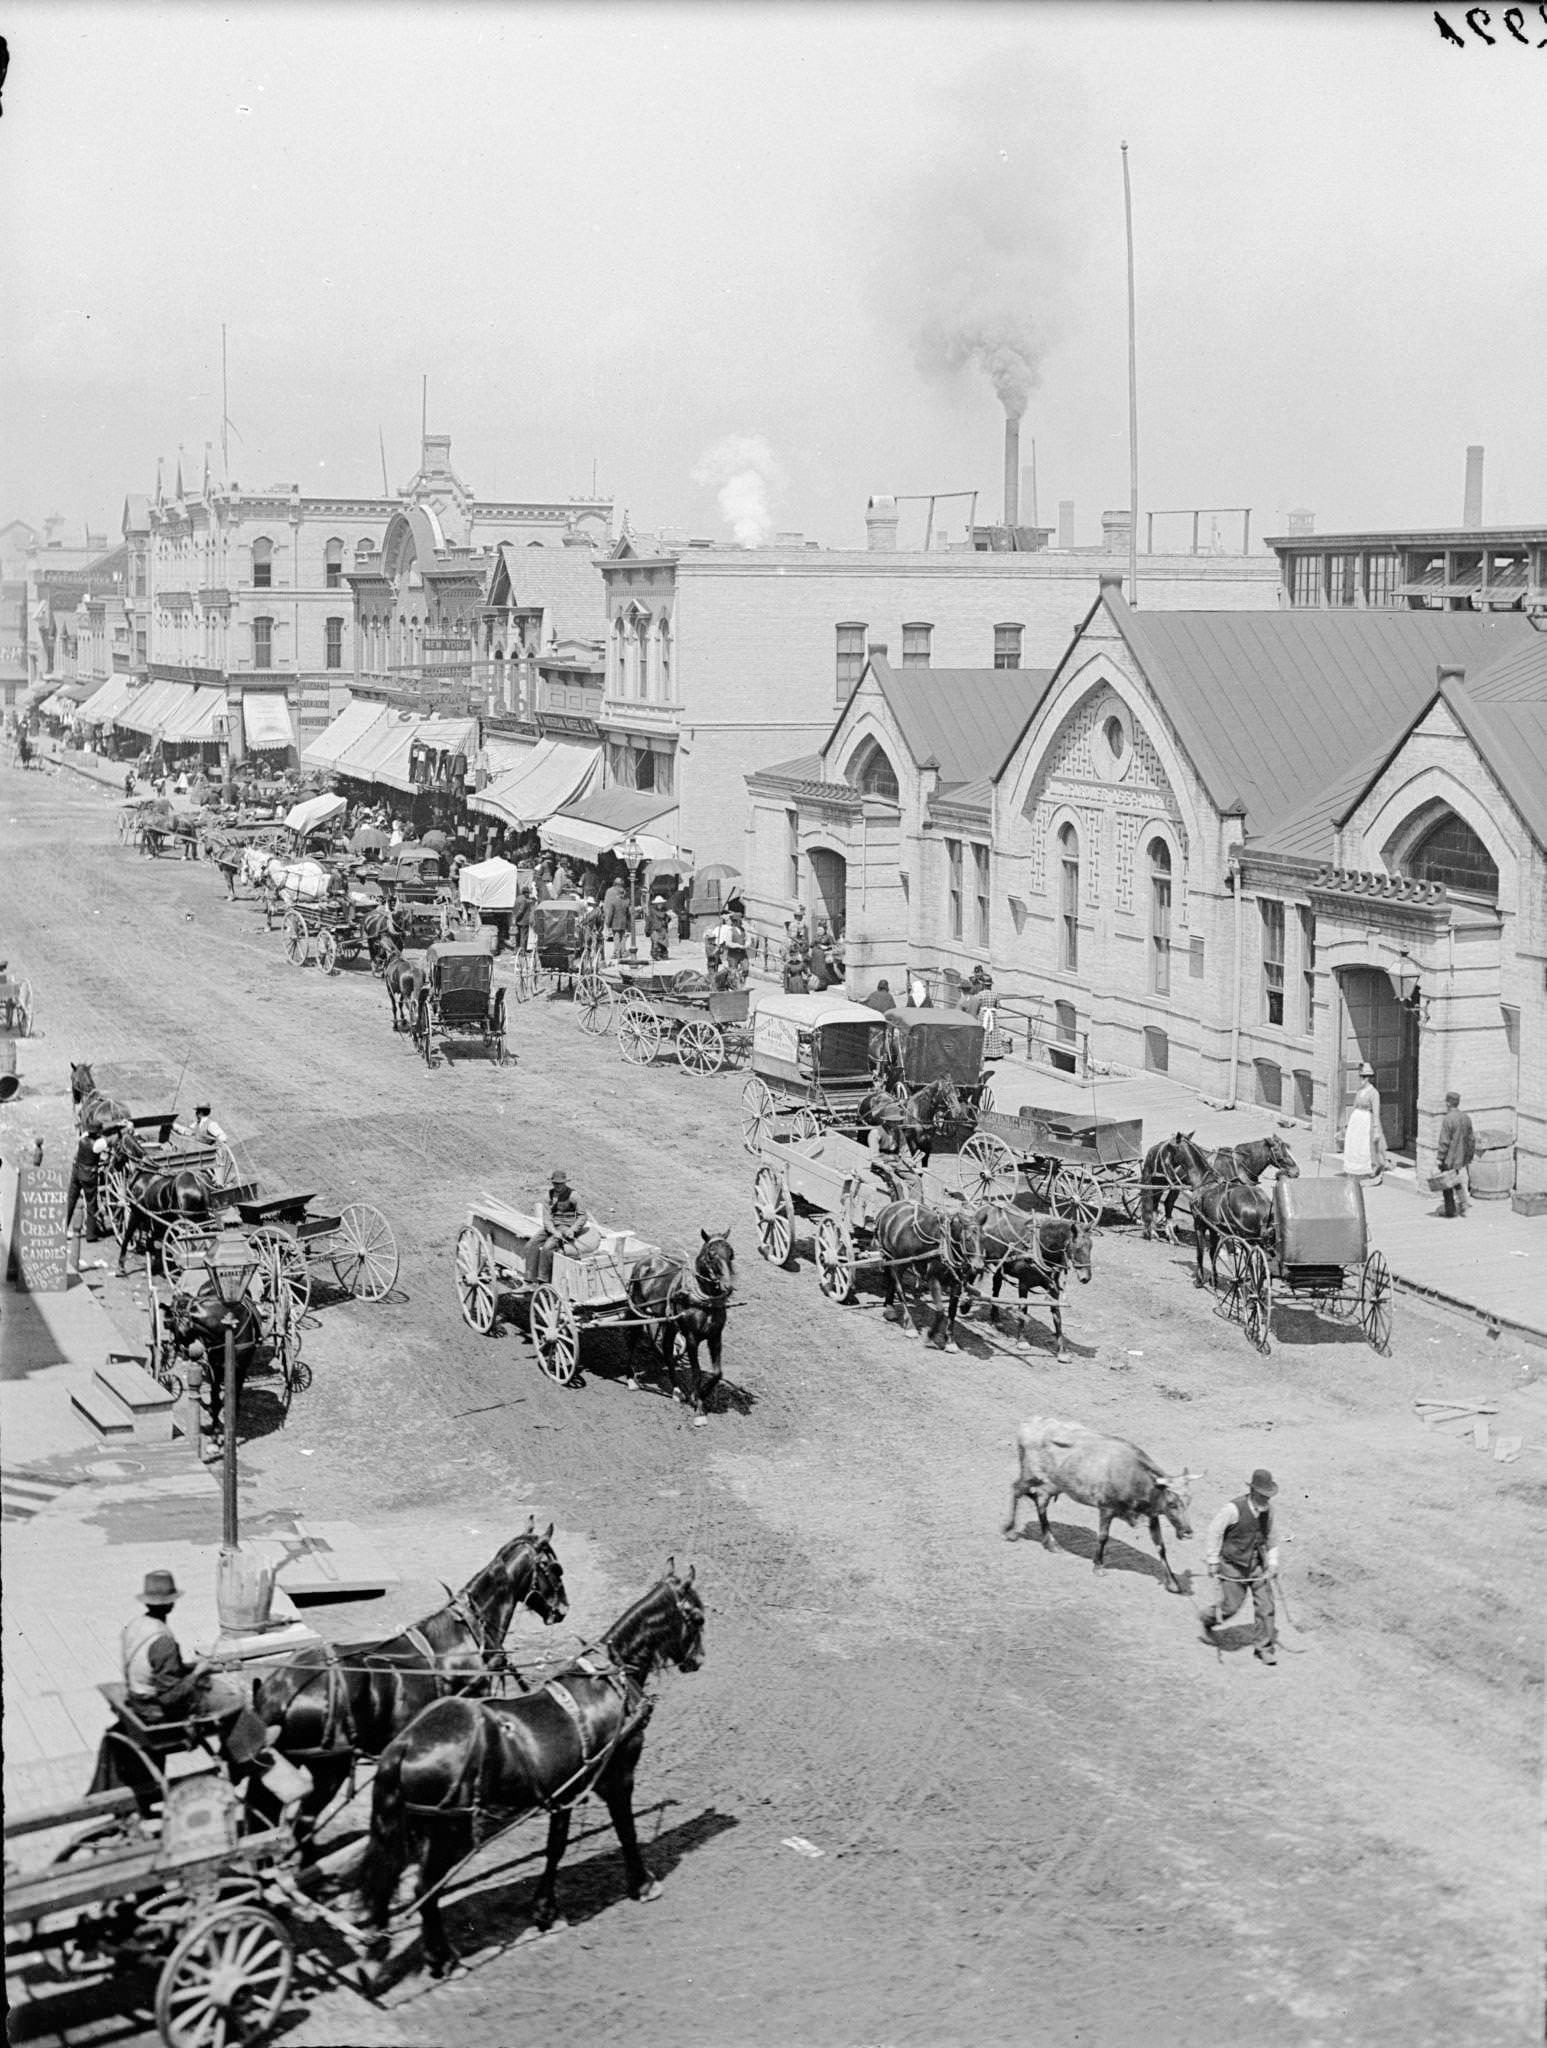 Farmer's market with horse-drawn vehicles and a man leading a bull, Milwaukee, Wisconsin, 1885.